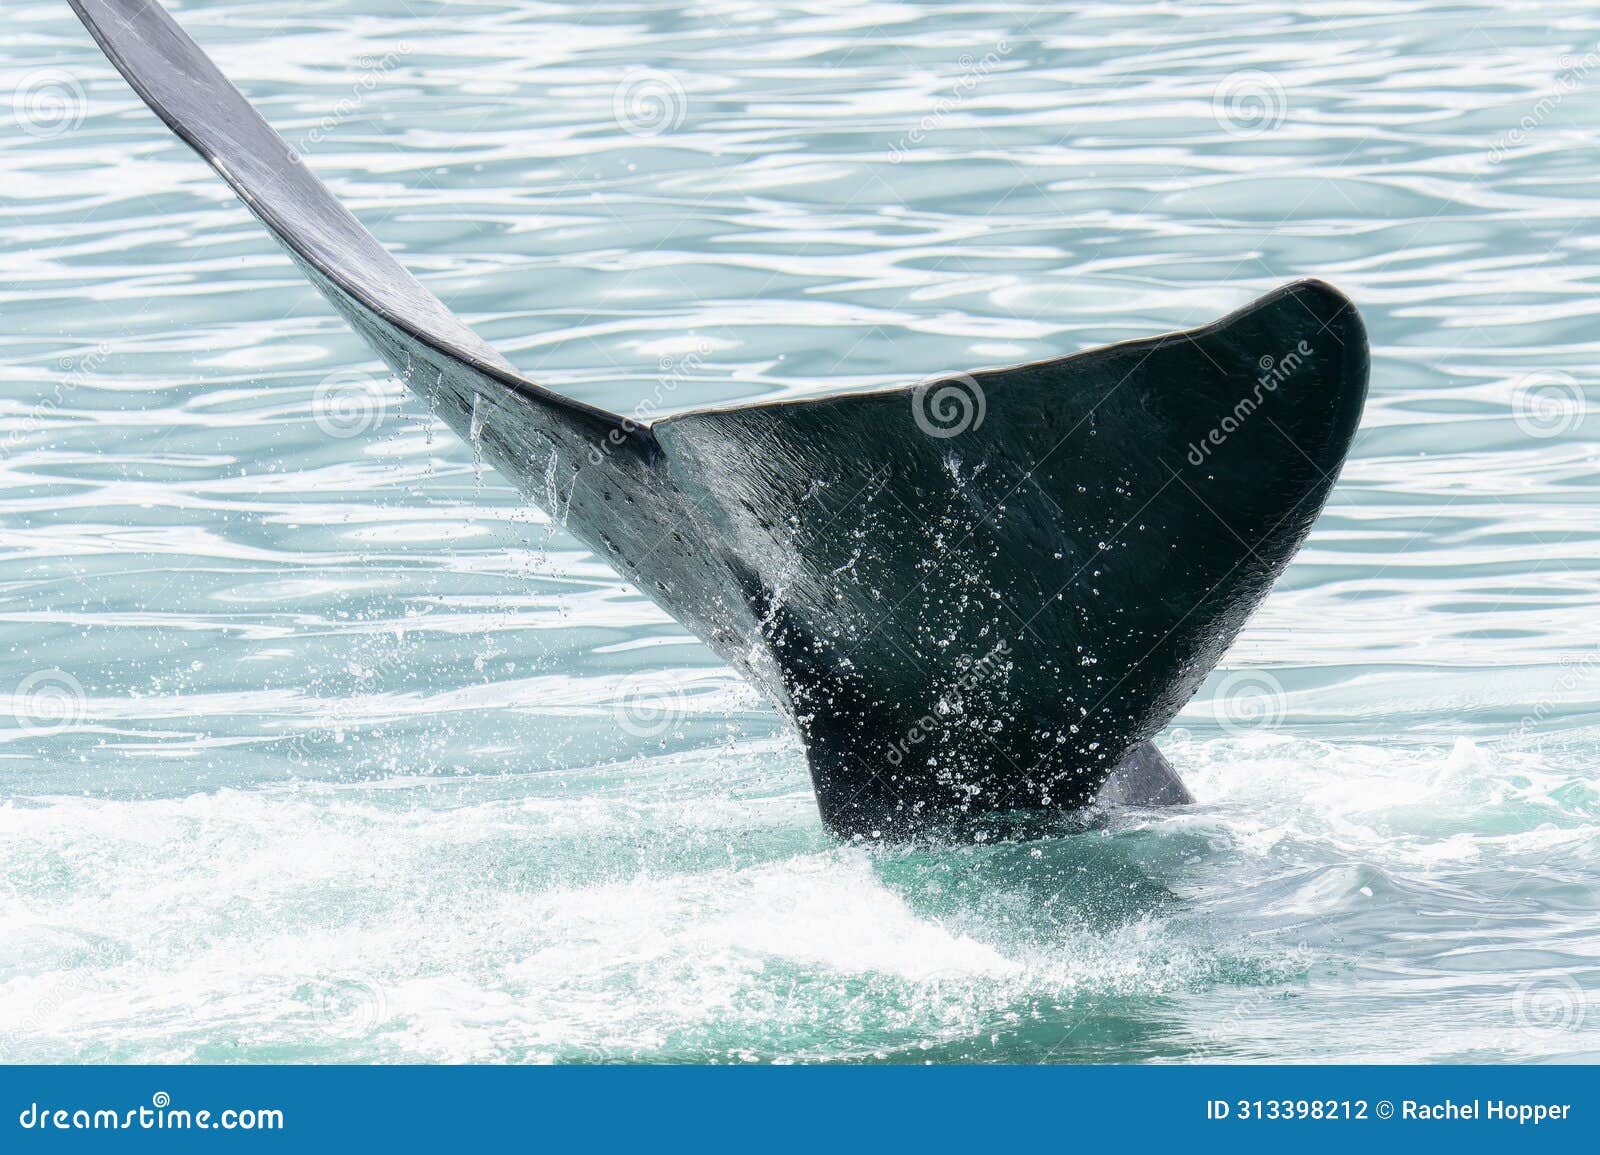 a southern right whales, eubalaena australis, tail is visible as it breaks the water surface in south africa